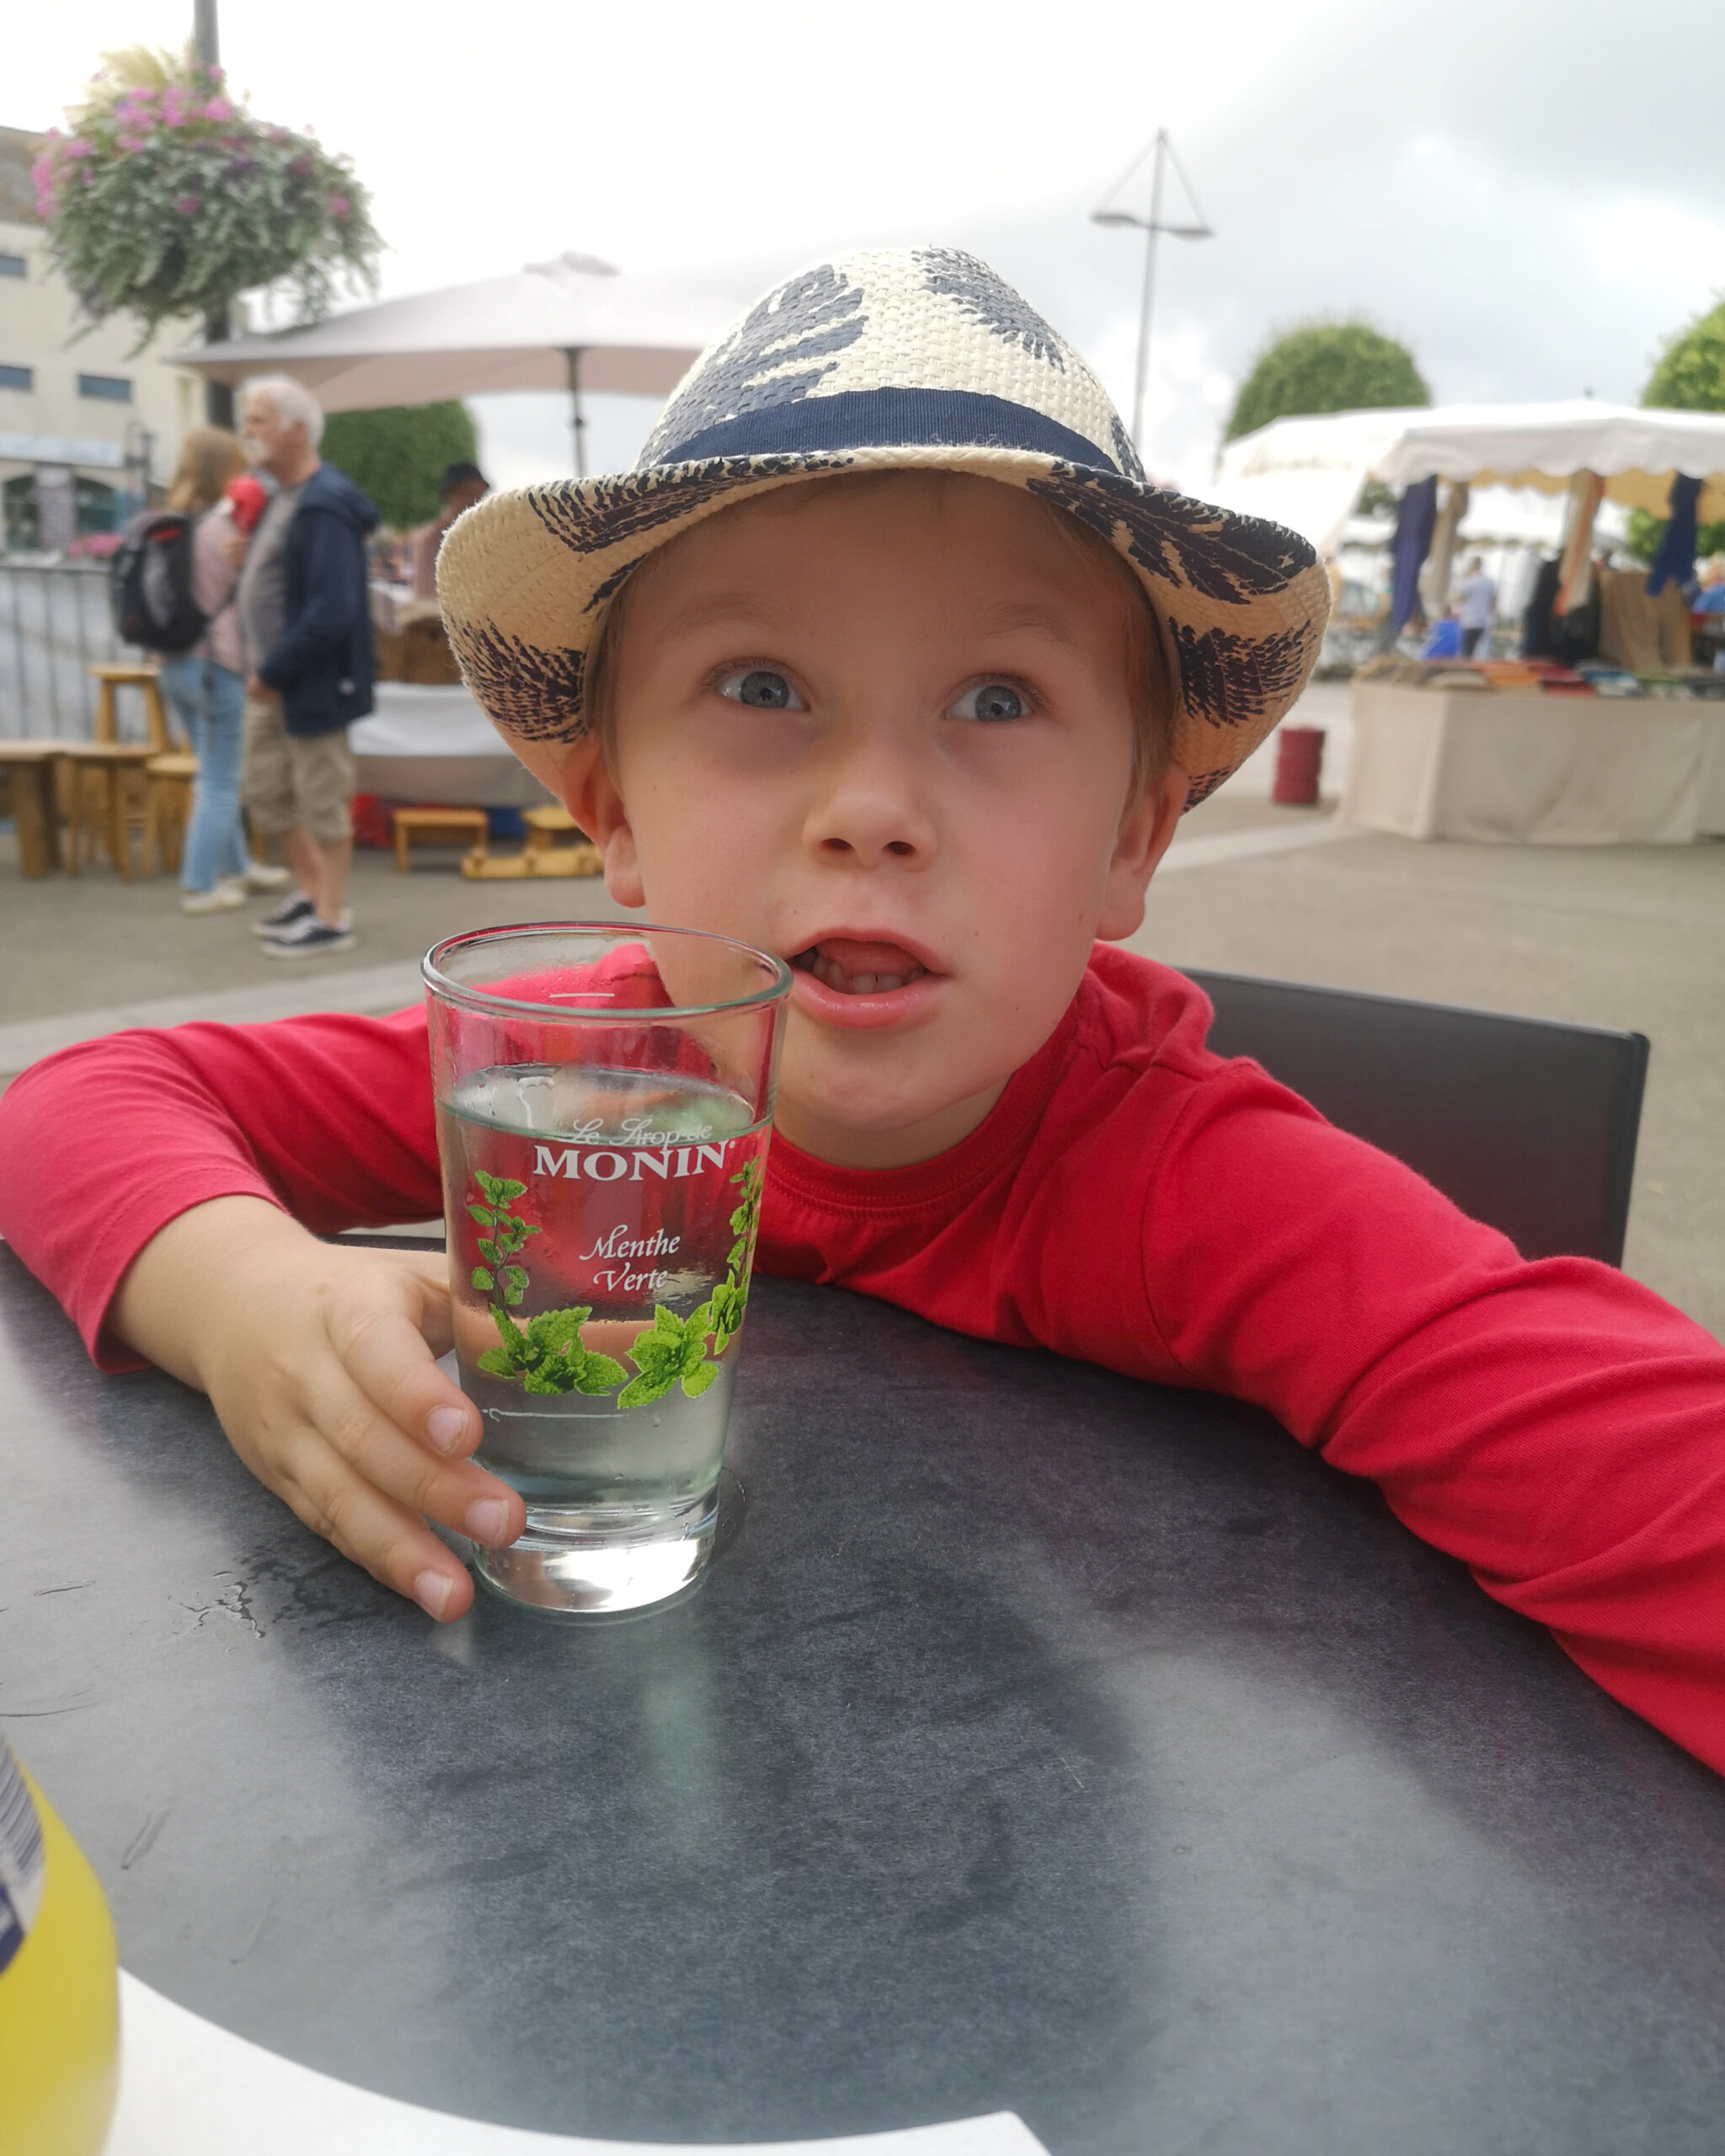 Things To Do In Normandy With Kids, Visit France, Visit Normandy, Normandy Tourism, Brittany Ferries, Family-Friendly, Family Holidays, Activities to Do, The Frenchie Mummy, Travel Blog, Family Travel, Cherbourg, French Beaches, WWII, Omaha Beach, La Cité De La Mer, Arromanches